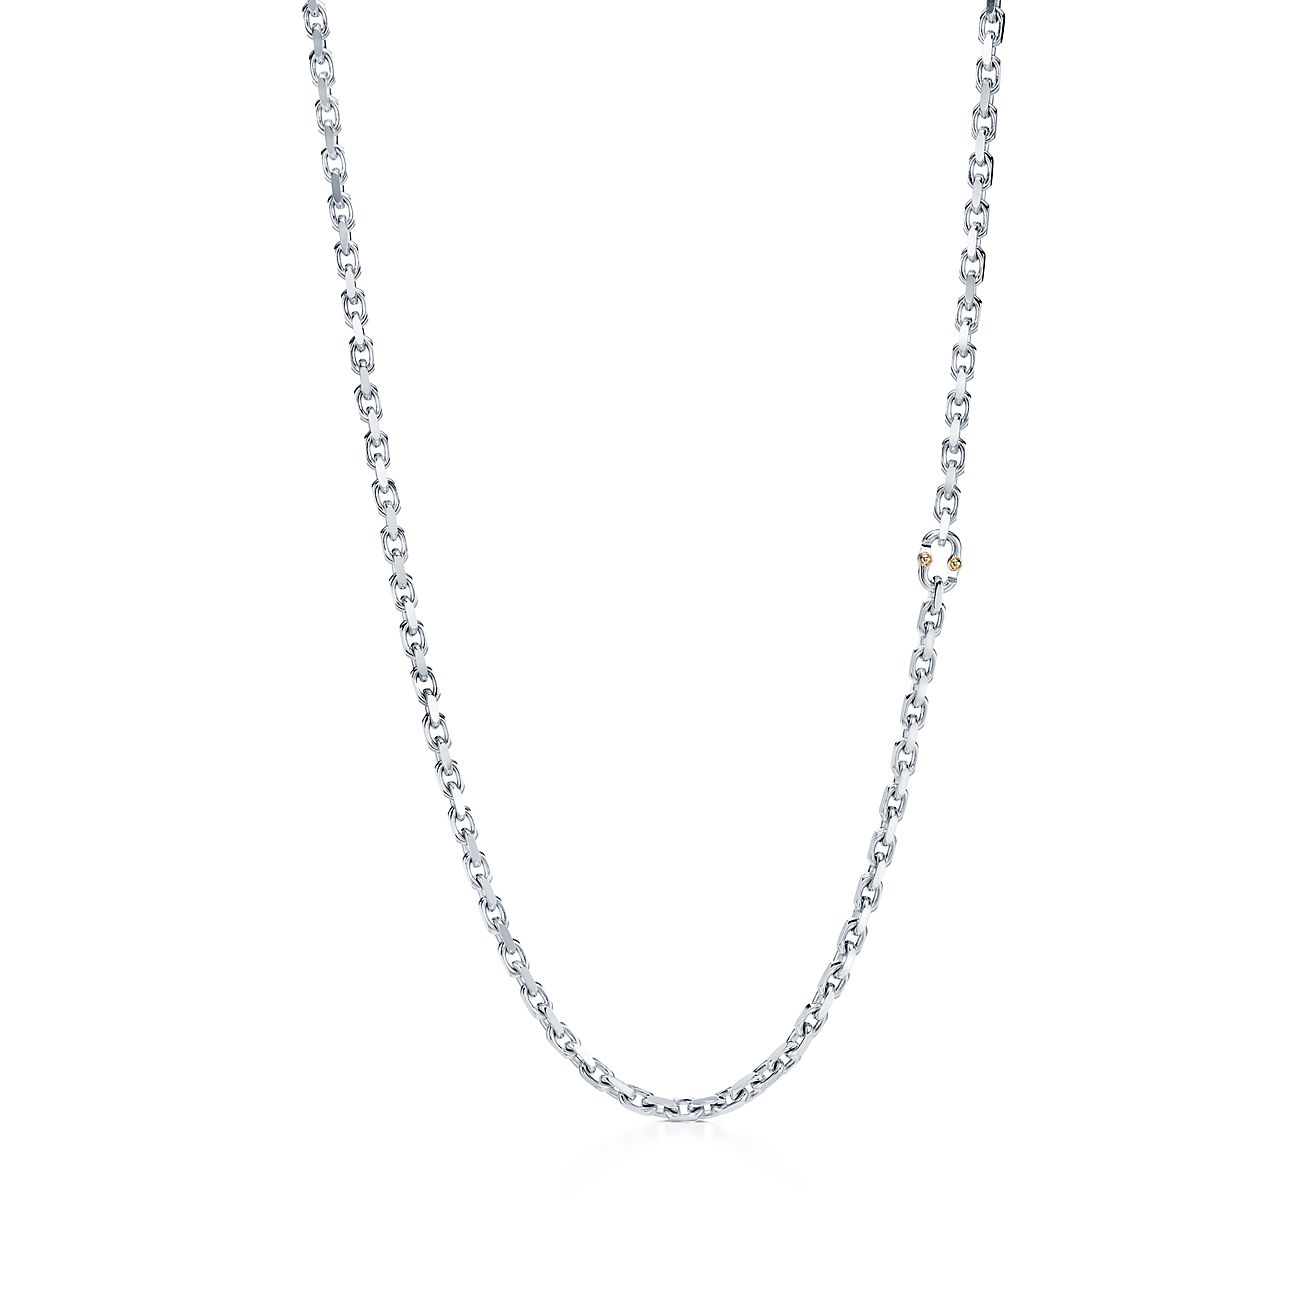 Tiffany 1837™ Makers chain necklace in sterling silver and 18k gold, 24